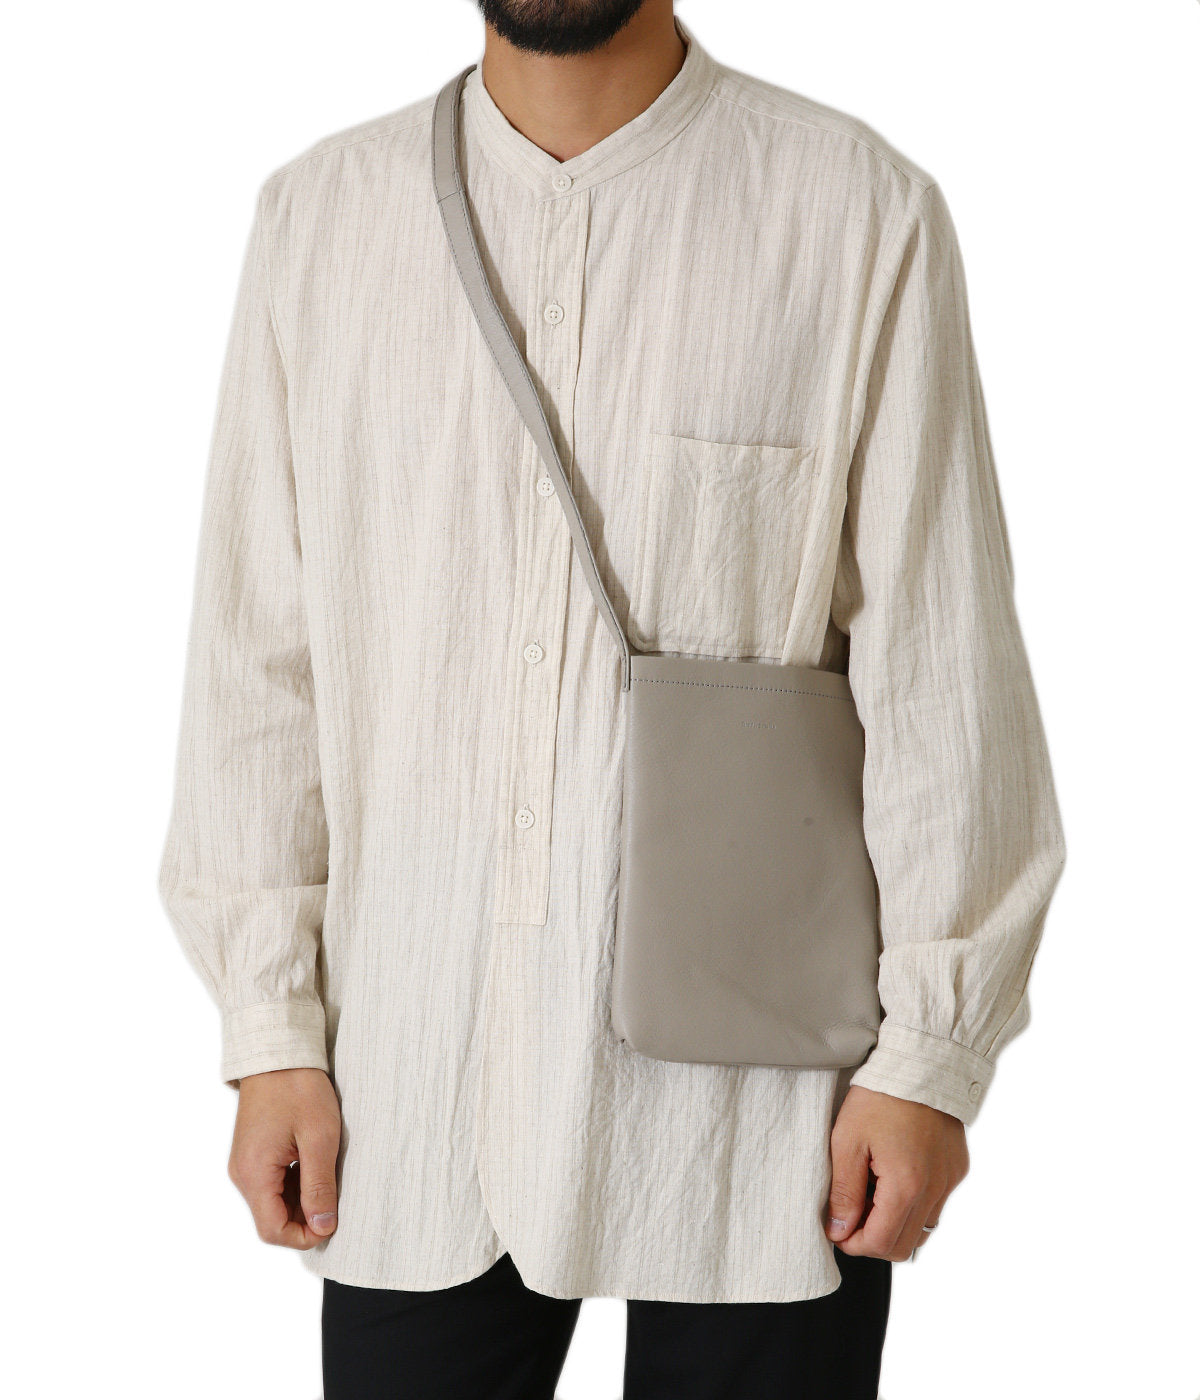 Hender Scheme Cow Shoulder Small – unexpected store